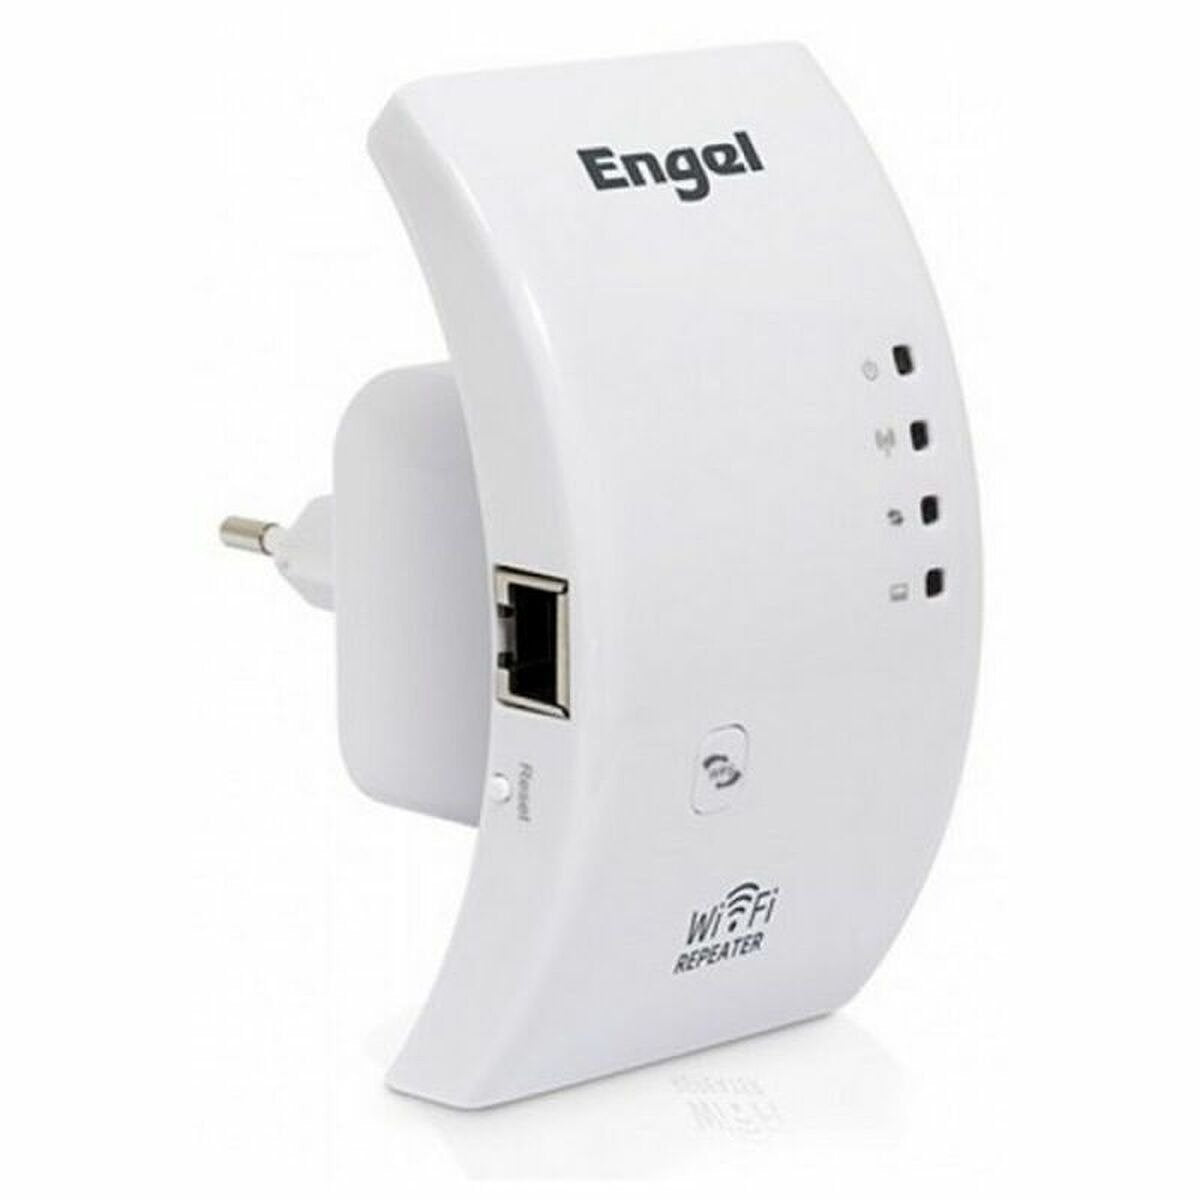 Wi-Fi-Repeater Engel PW3000 2.4 GHz 54 MB/s